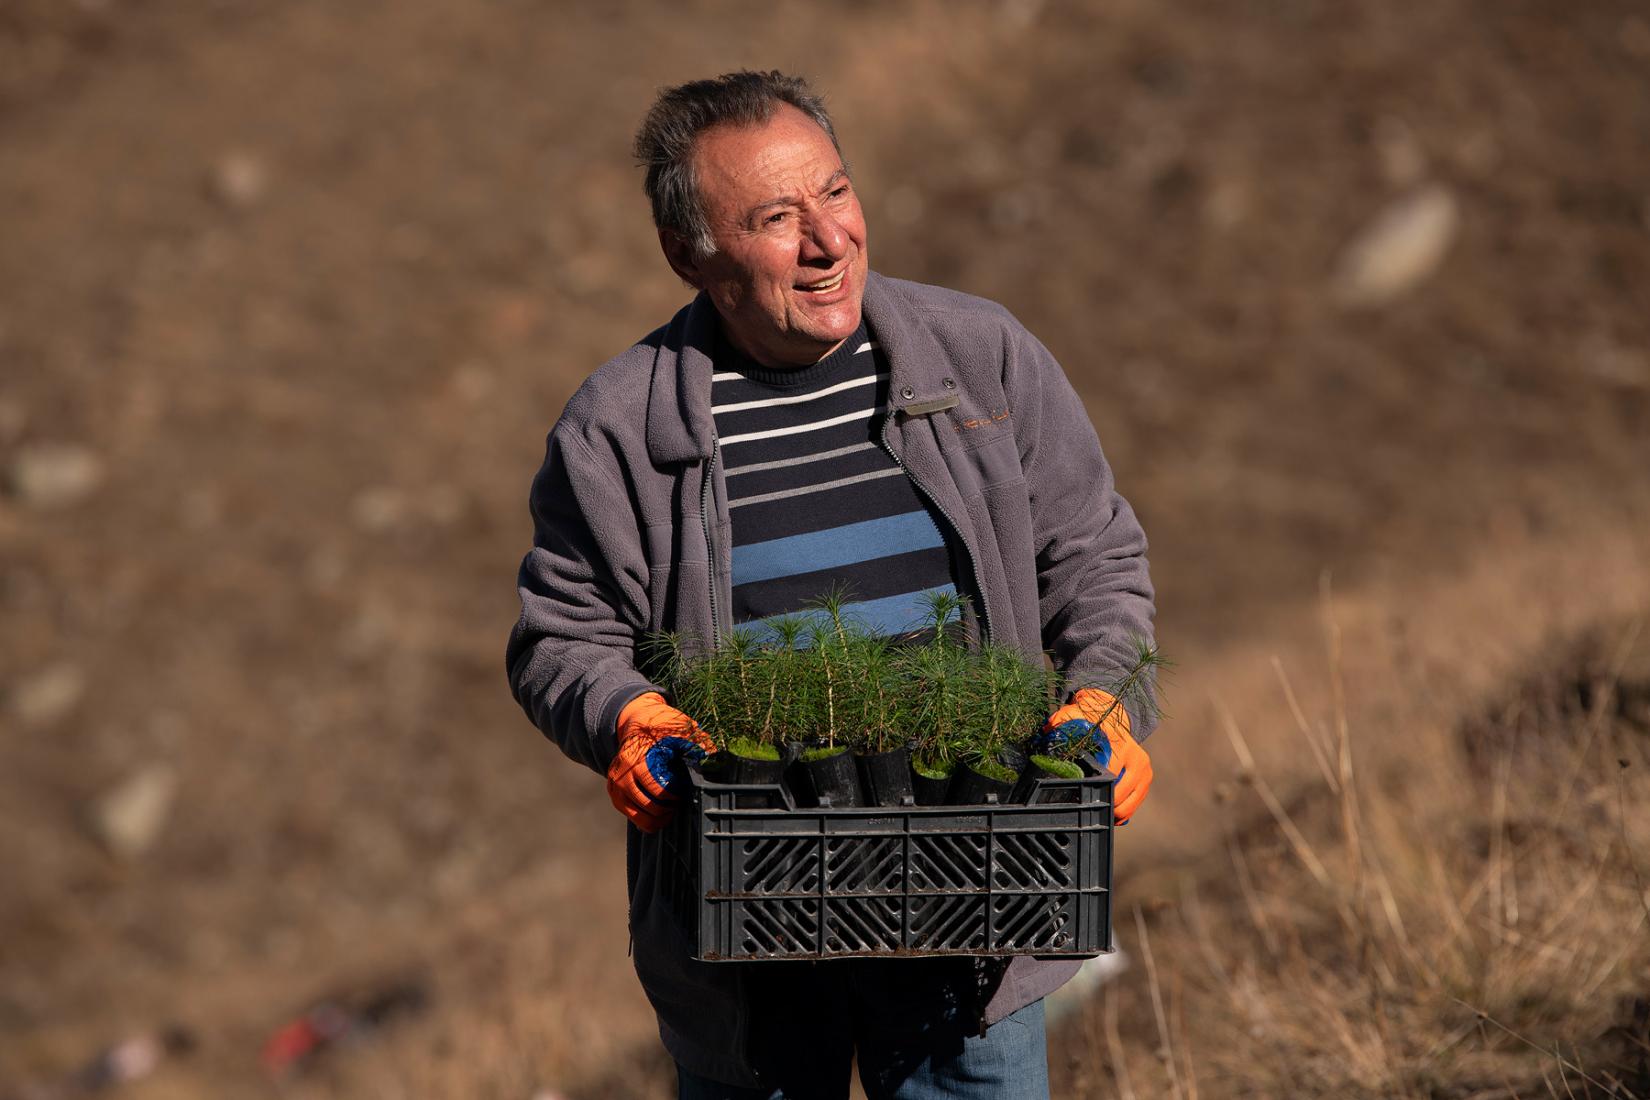 A person holding a box full of seedlings.